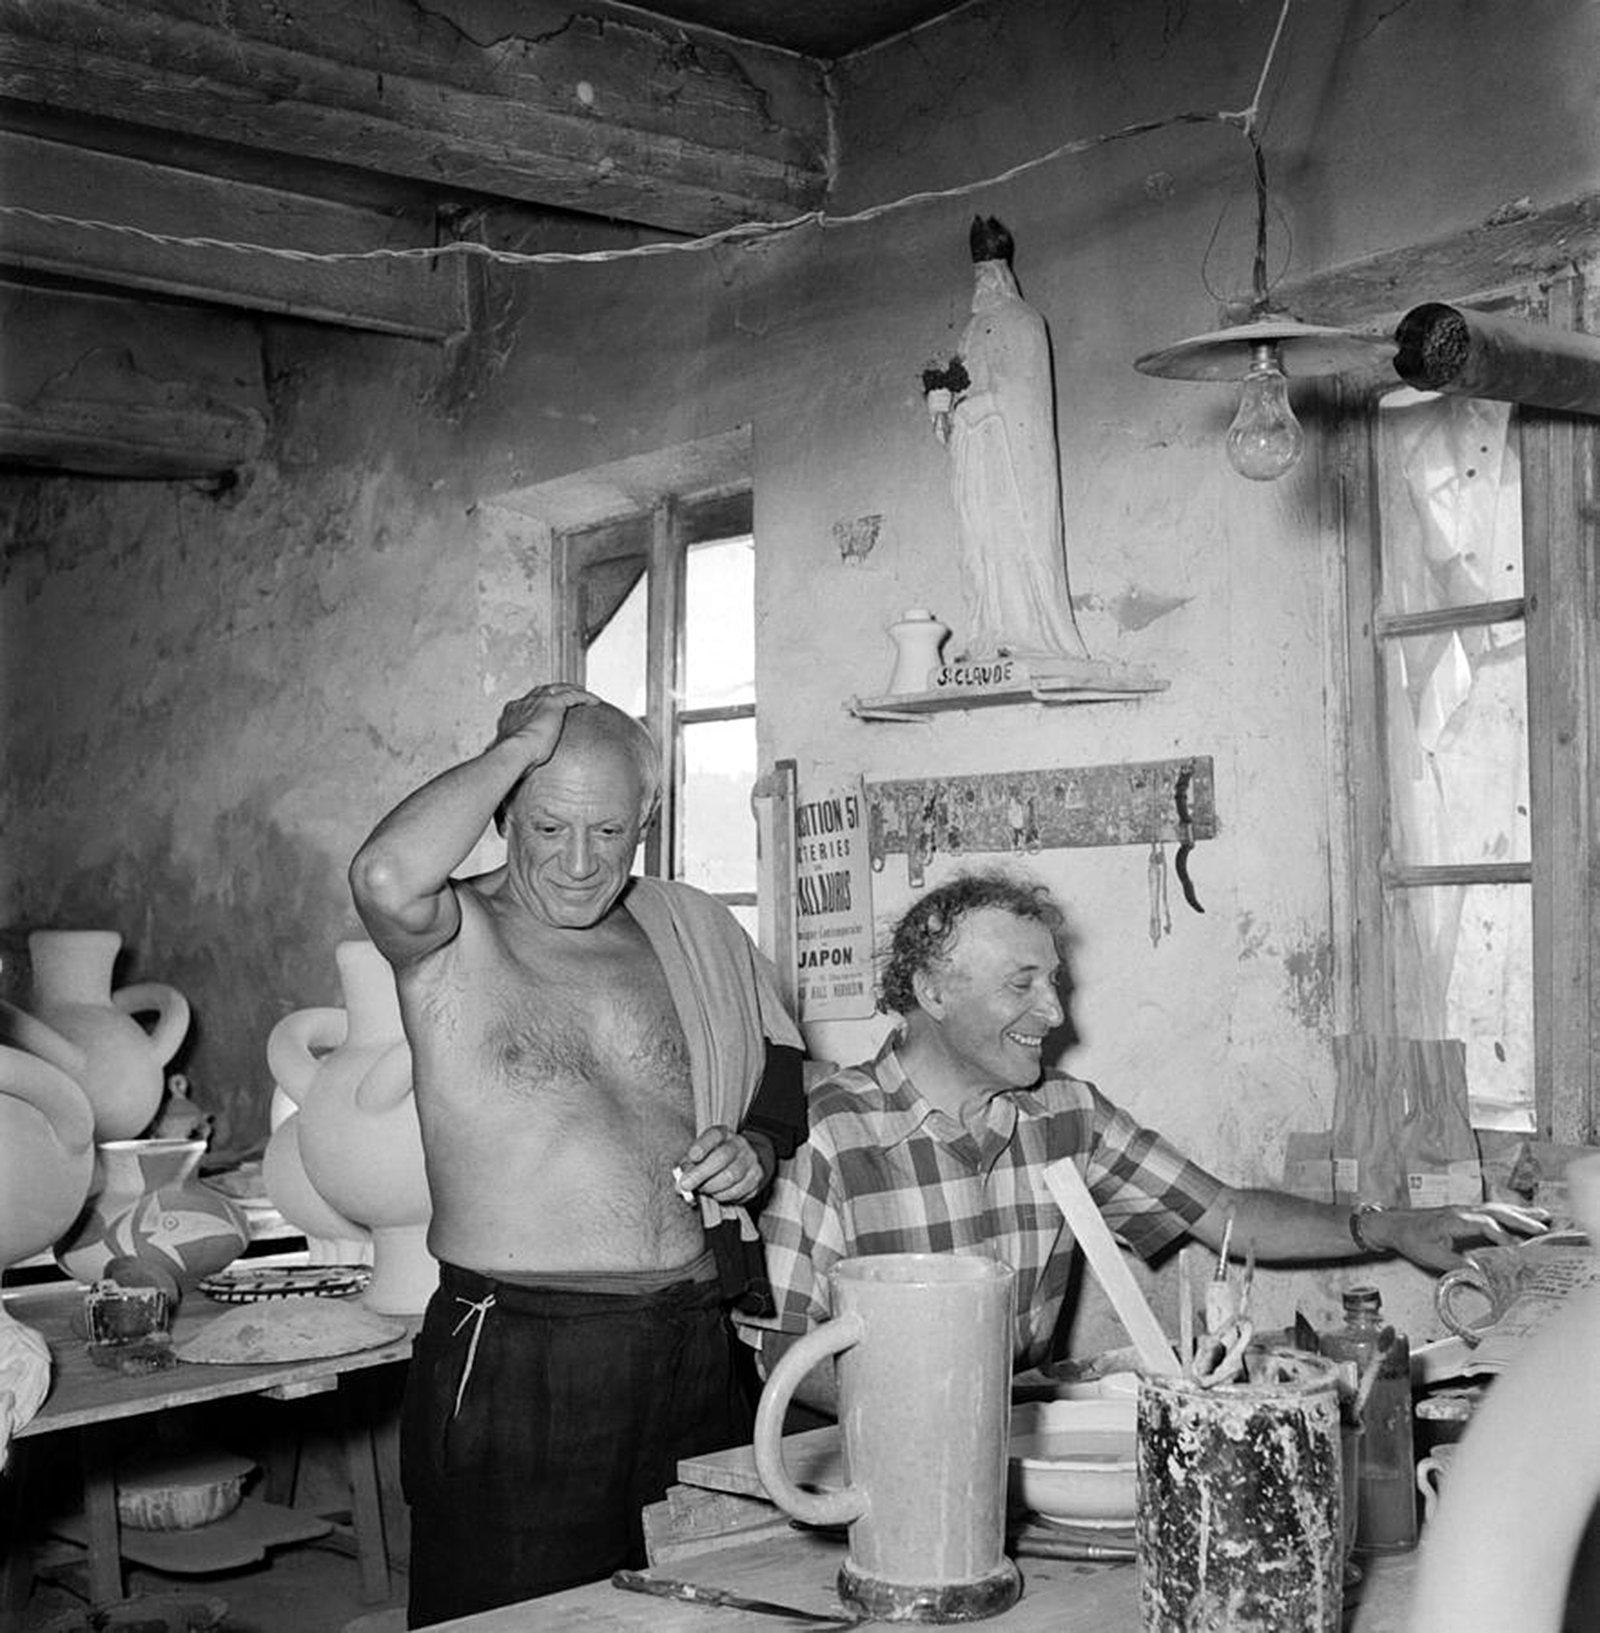 Pablo Picasso and Marc Chagall at the Madoura ceramics workshop in Vallauris 1948 - Photo Getty Images